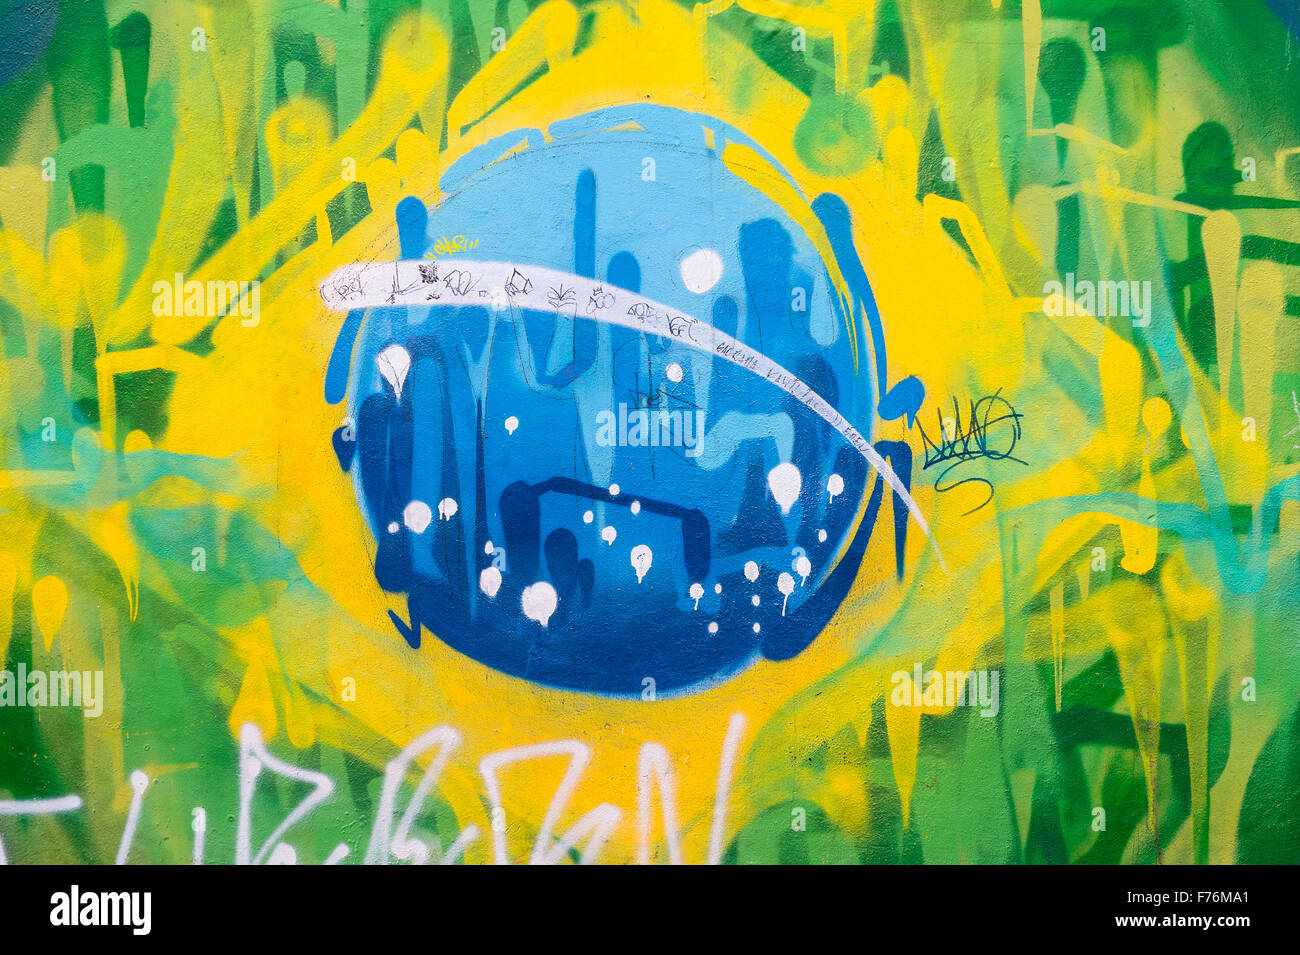 Abstract Brazilian flag made from brightly colored graffiti brushstrokes Stock Photo